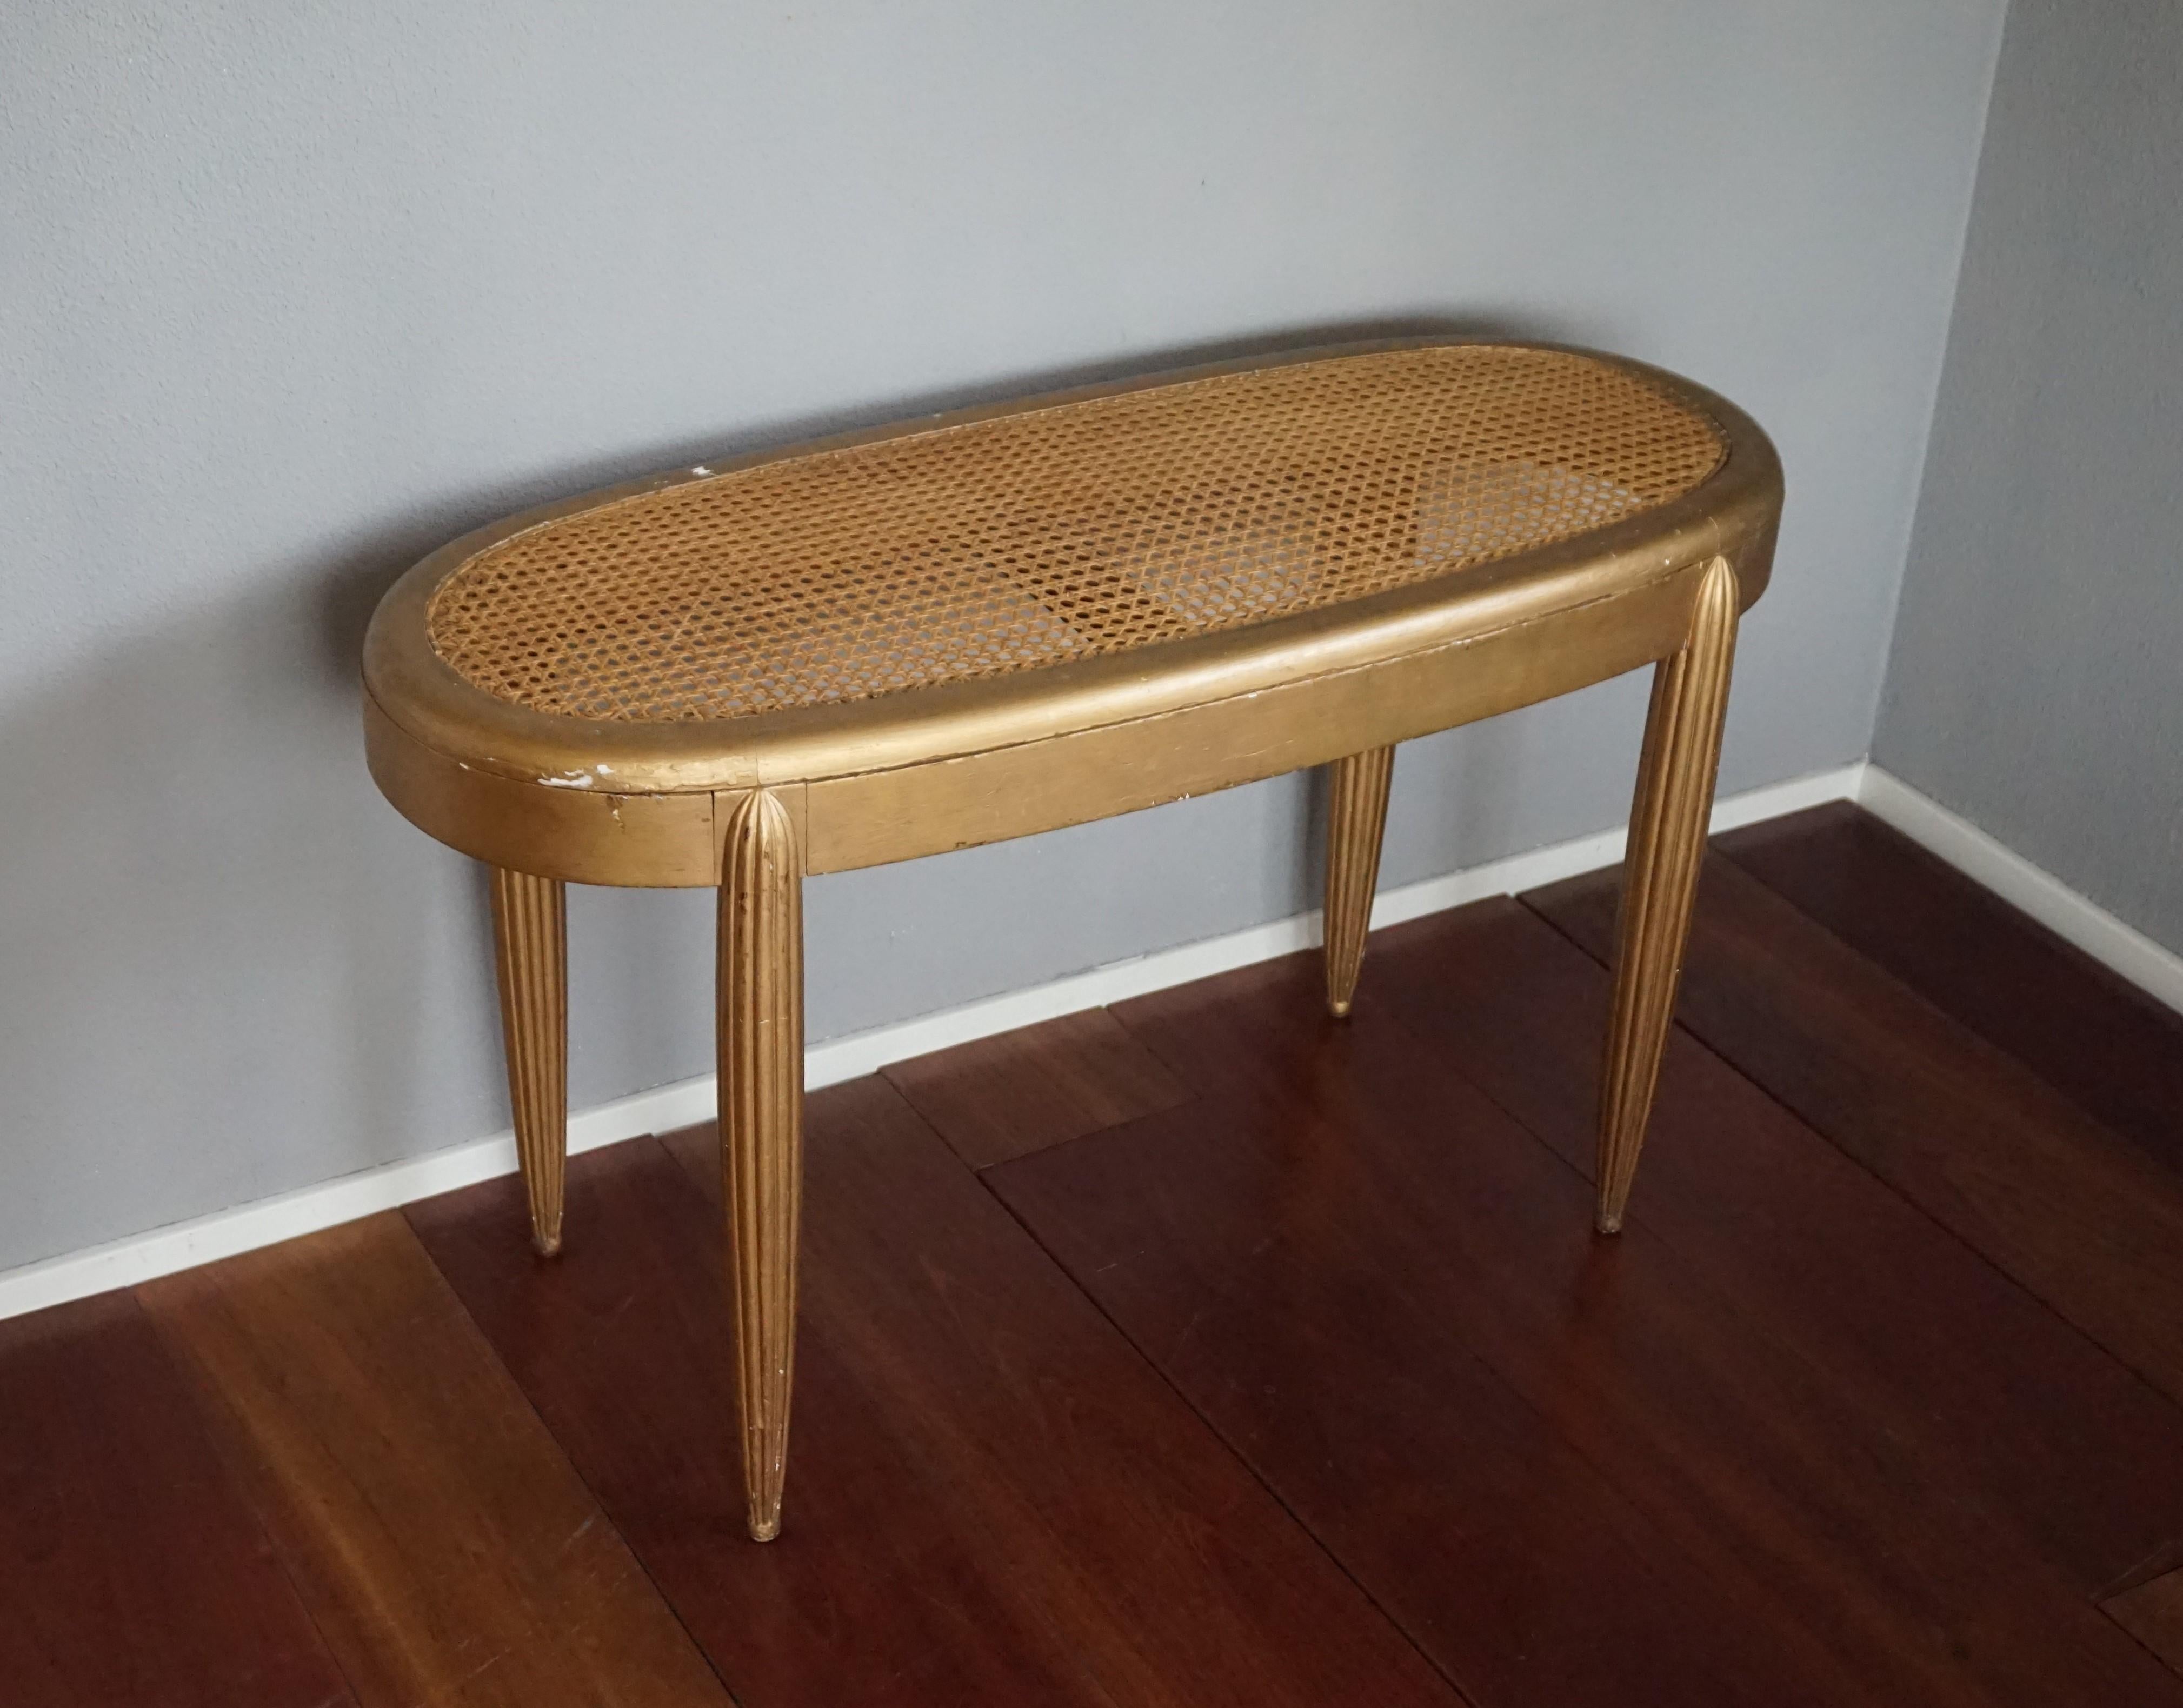 Gold Painted French Art Deco Hall Bench / Stool with Hand-Woven Rattan Webbing For Sale 3